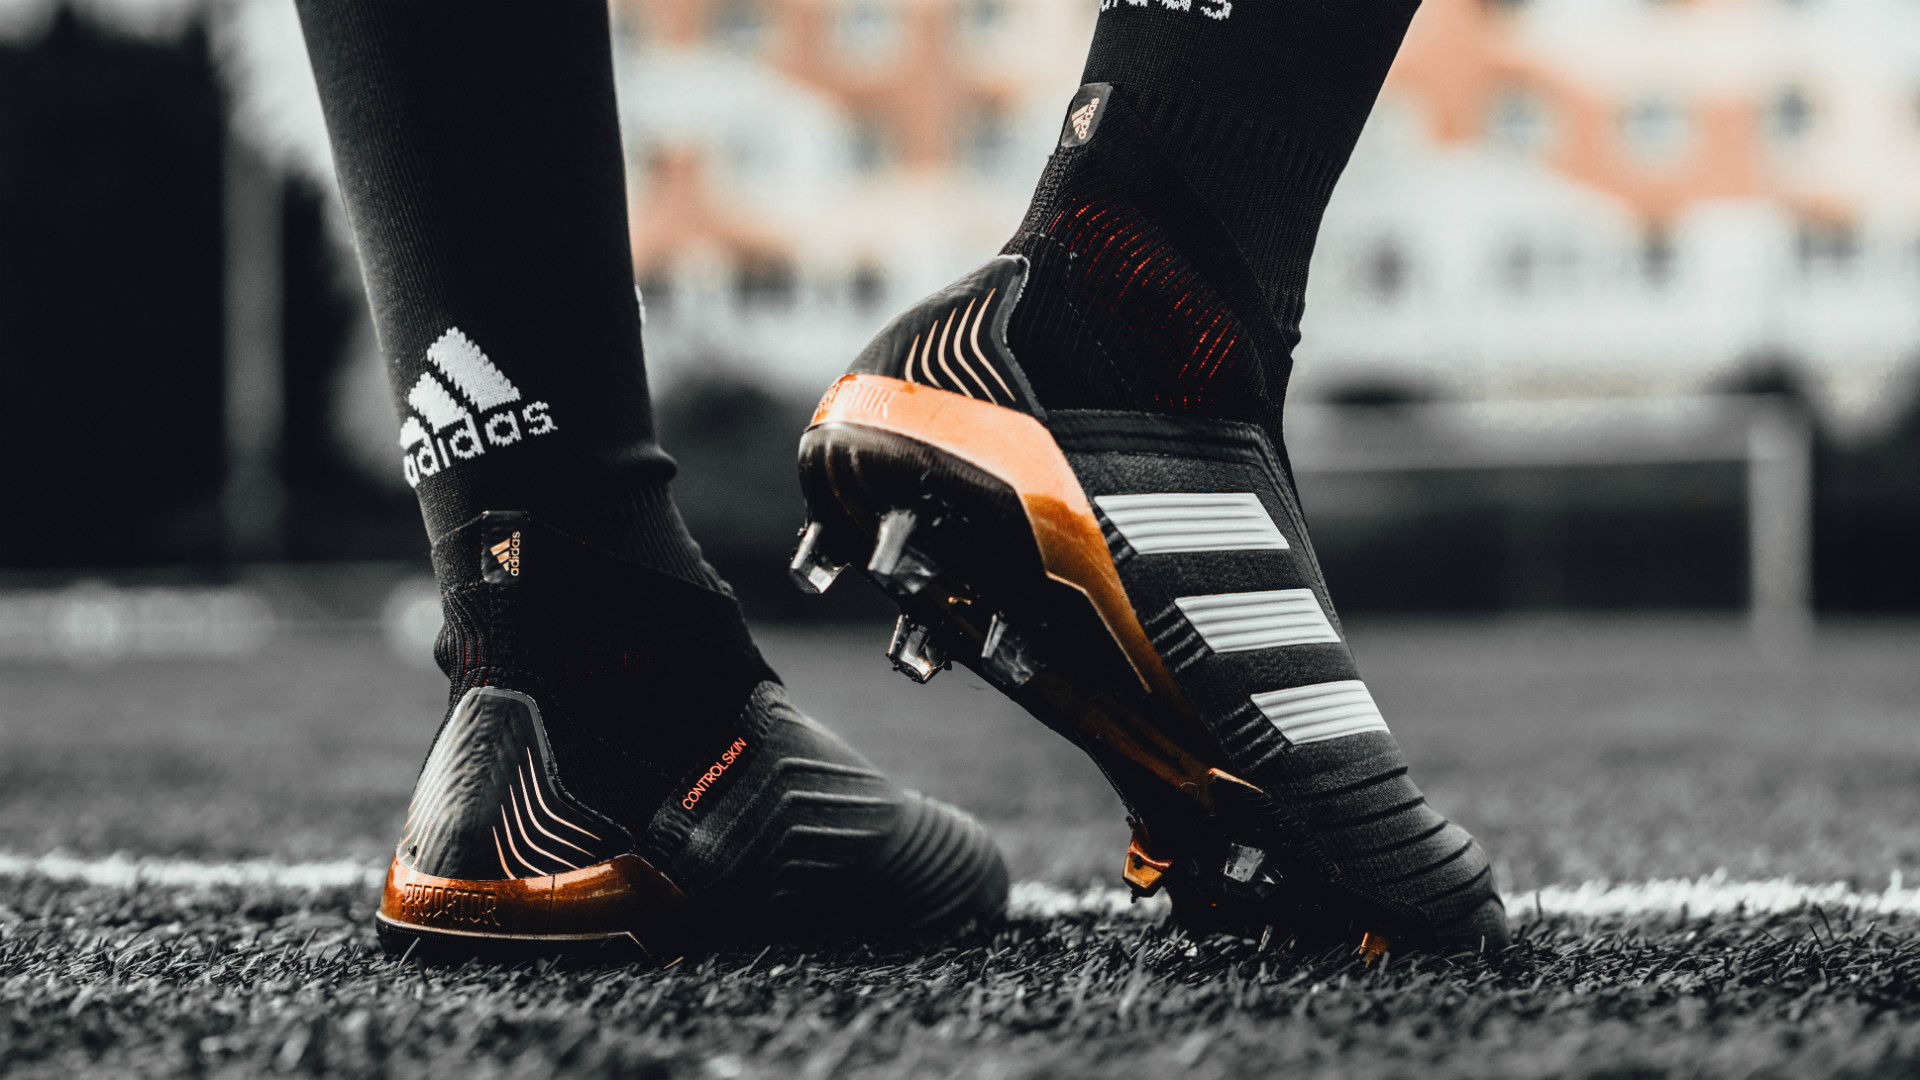 Adidas Iconic boots re-launched for Pogba, Ozil Dele | Goal.com Tanzania